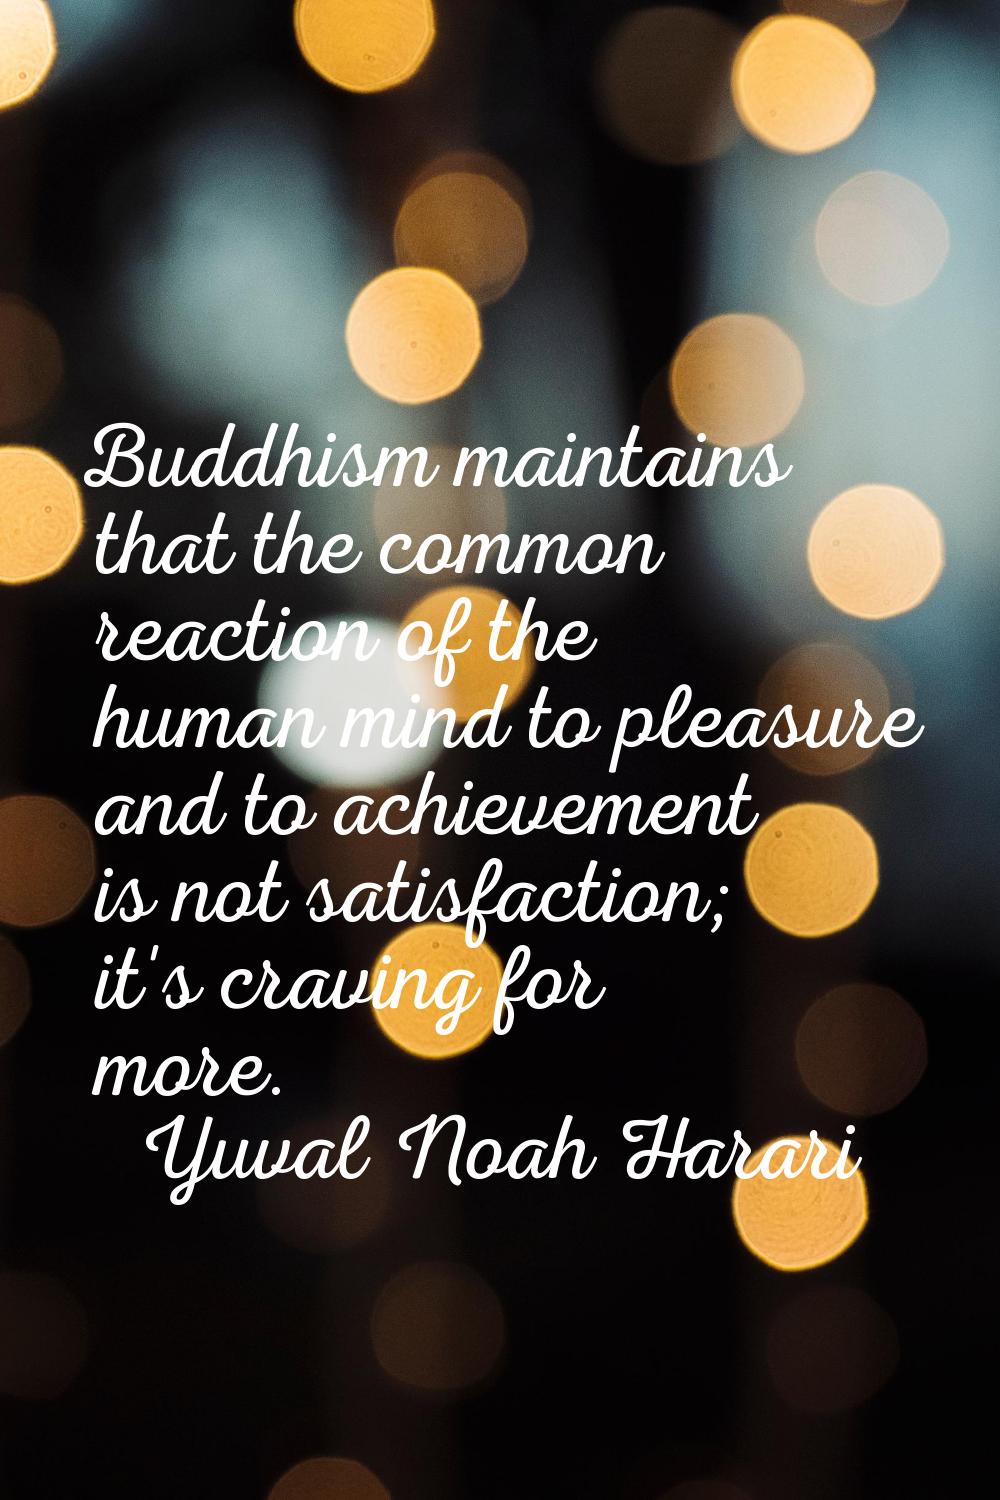 Buddhism maintains that the common reaction of the human mind to pleasure and to achievement is not